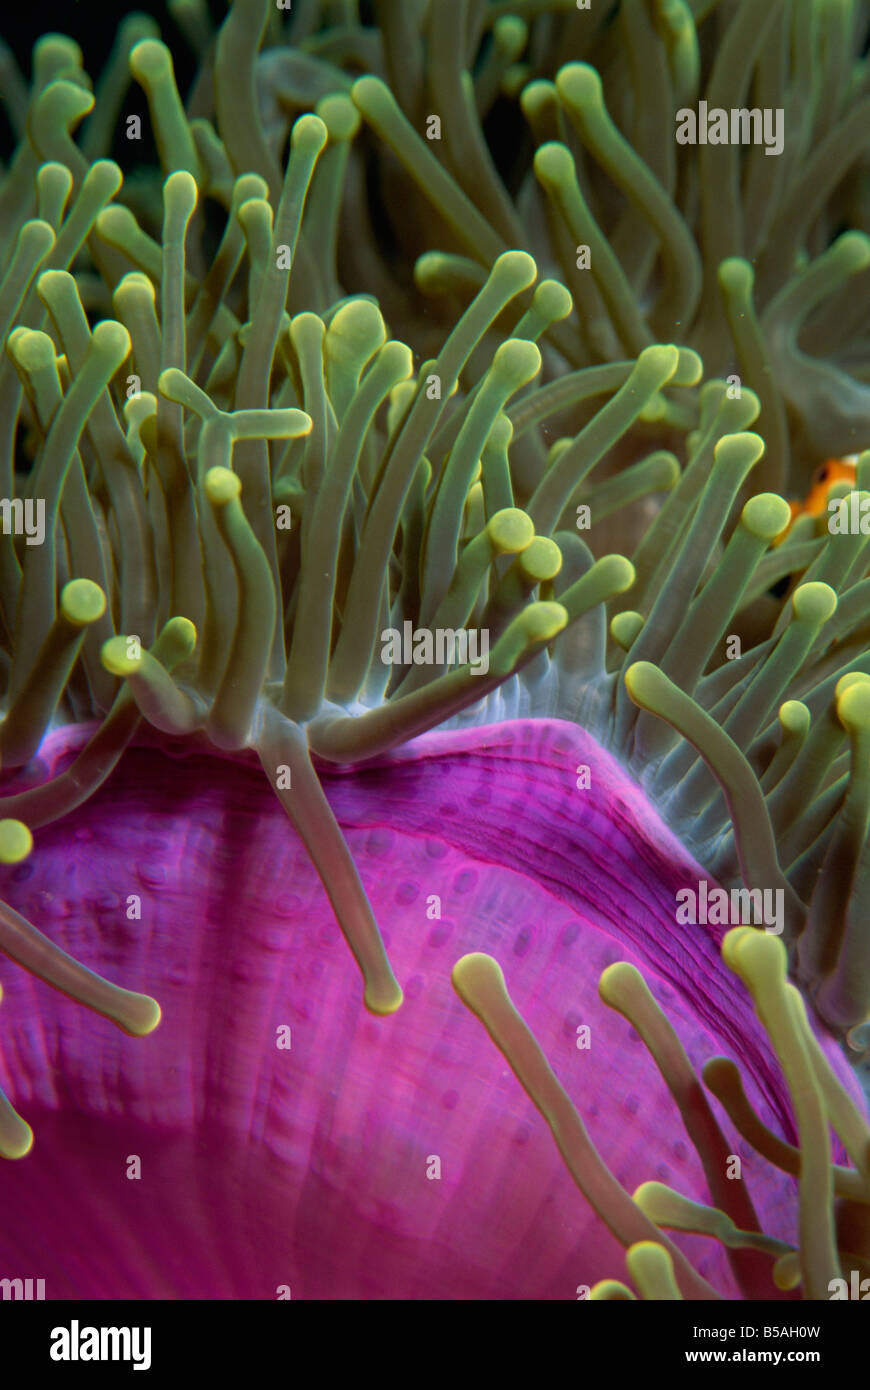 Giant anemones, prolific throughout the Indo-Pacific, Sabah, Borneo, Malaysia, Southeast Asia Stock Photo